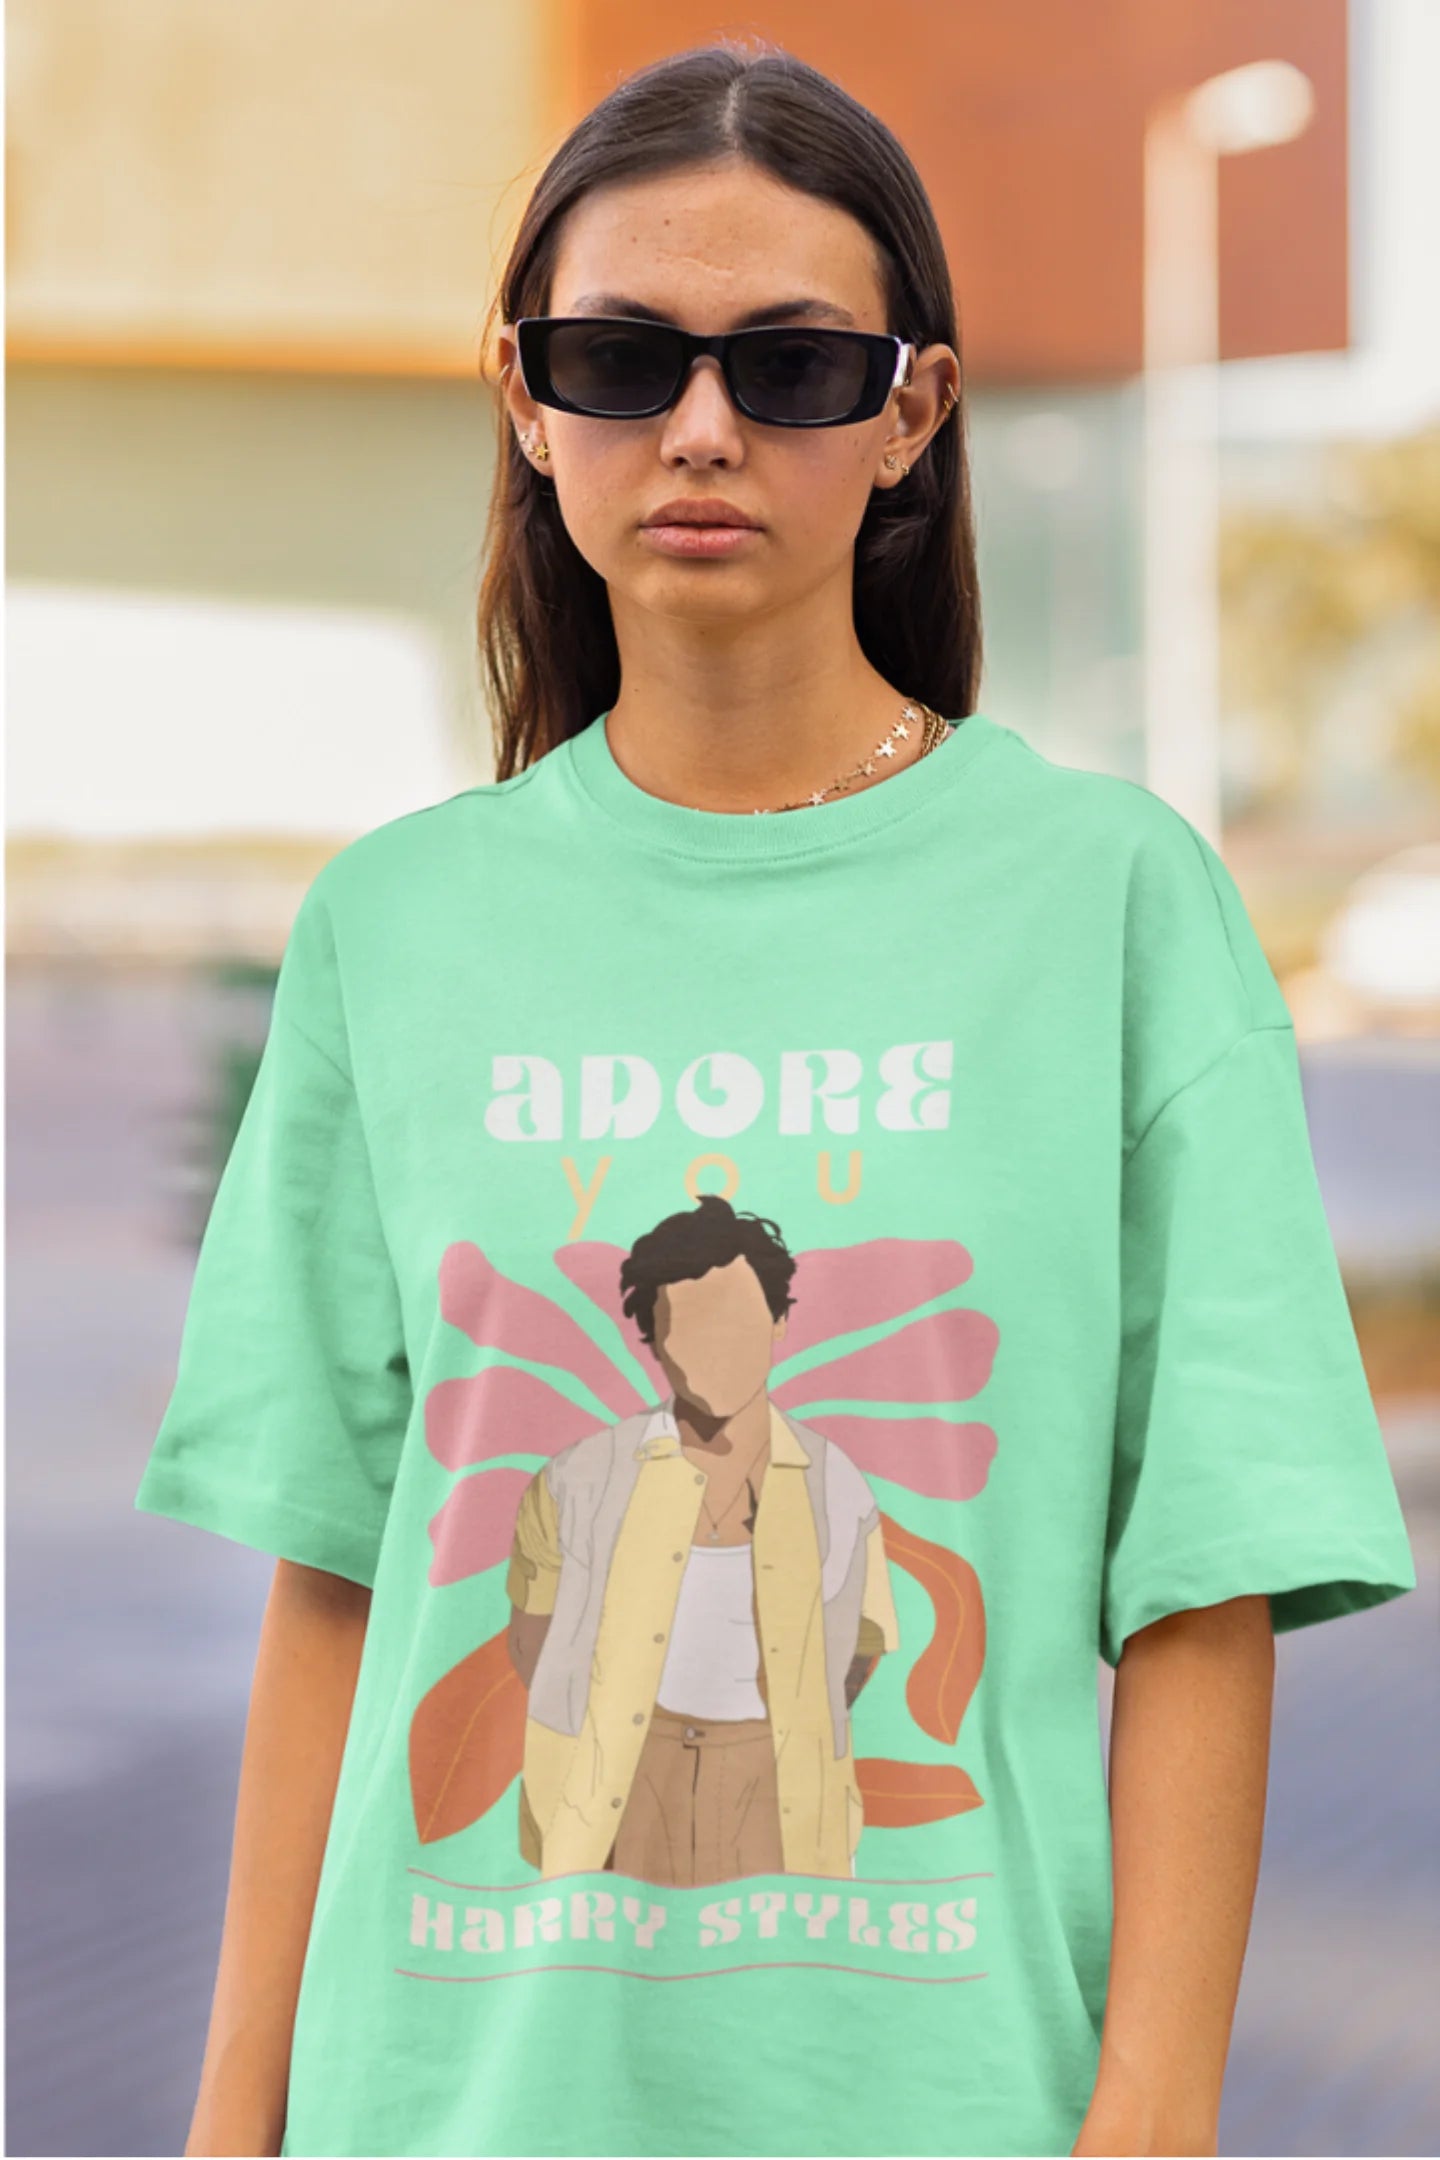 Third image of woman wearing mint green oversized t-shirt featuring 'Adore You' inspired design - ideal for fans of Harry Styles and One Direction